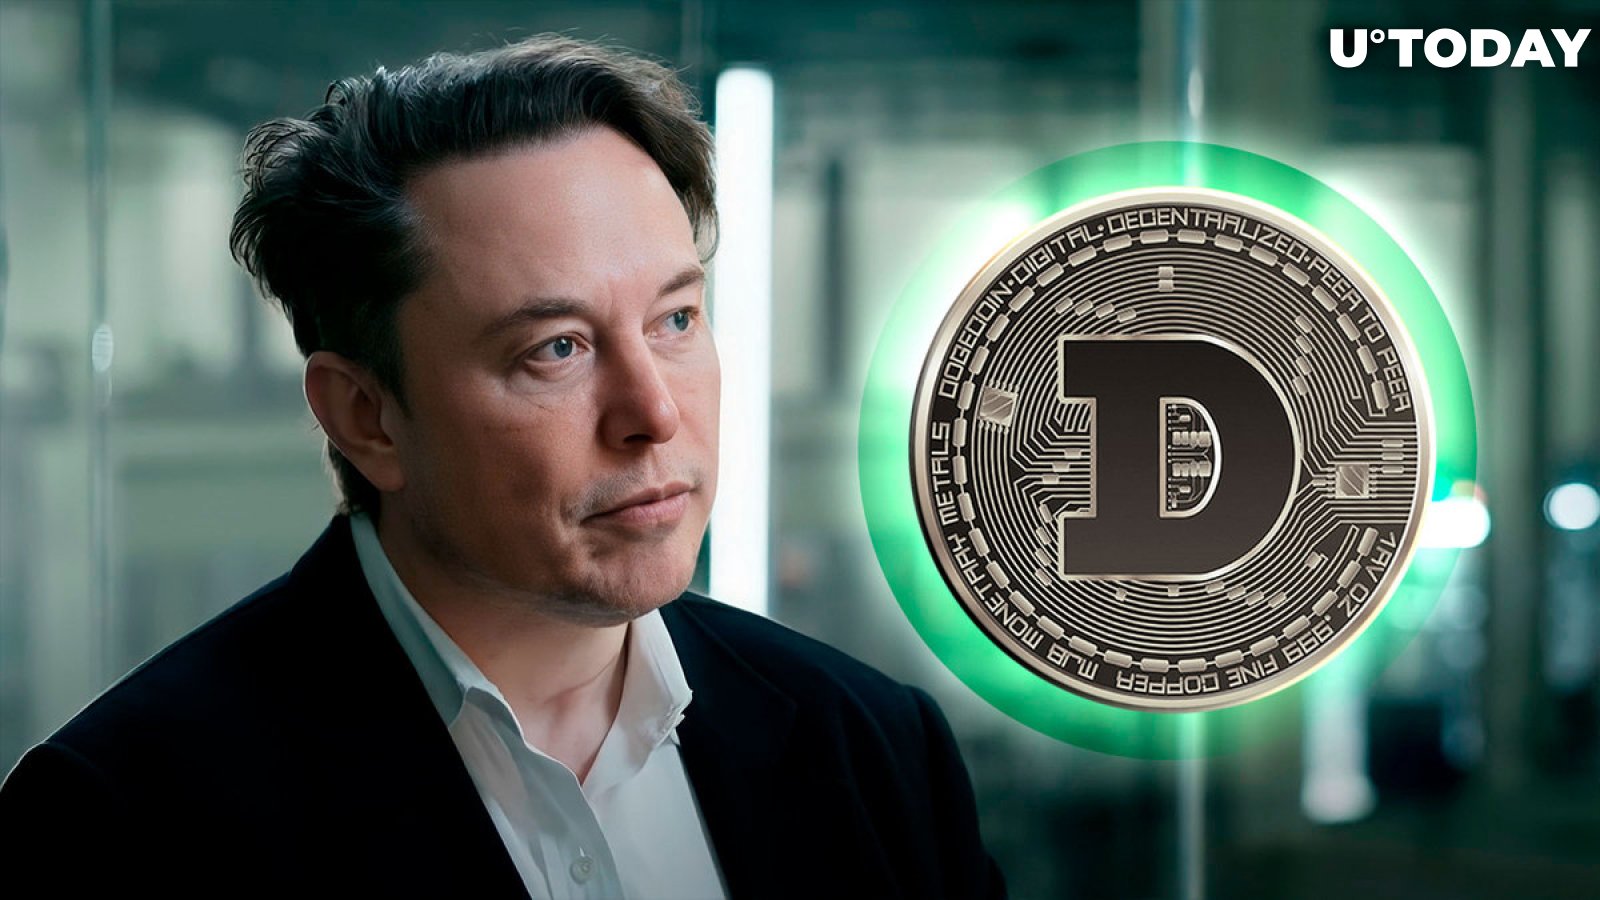 Dogecoin (DOGE) Price Goes Green as Elon Musk's Xpayments Nears Launch